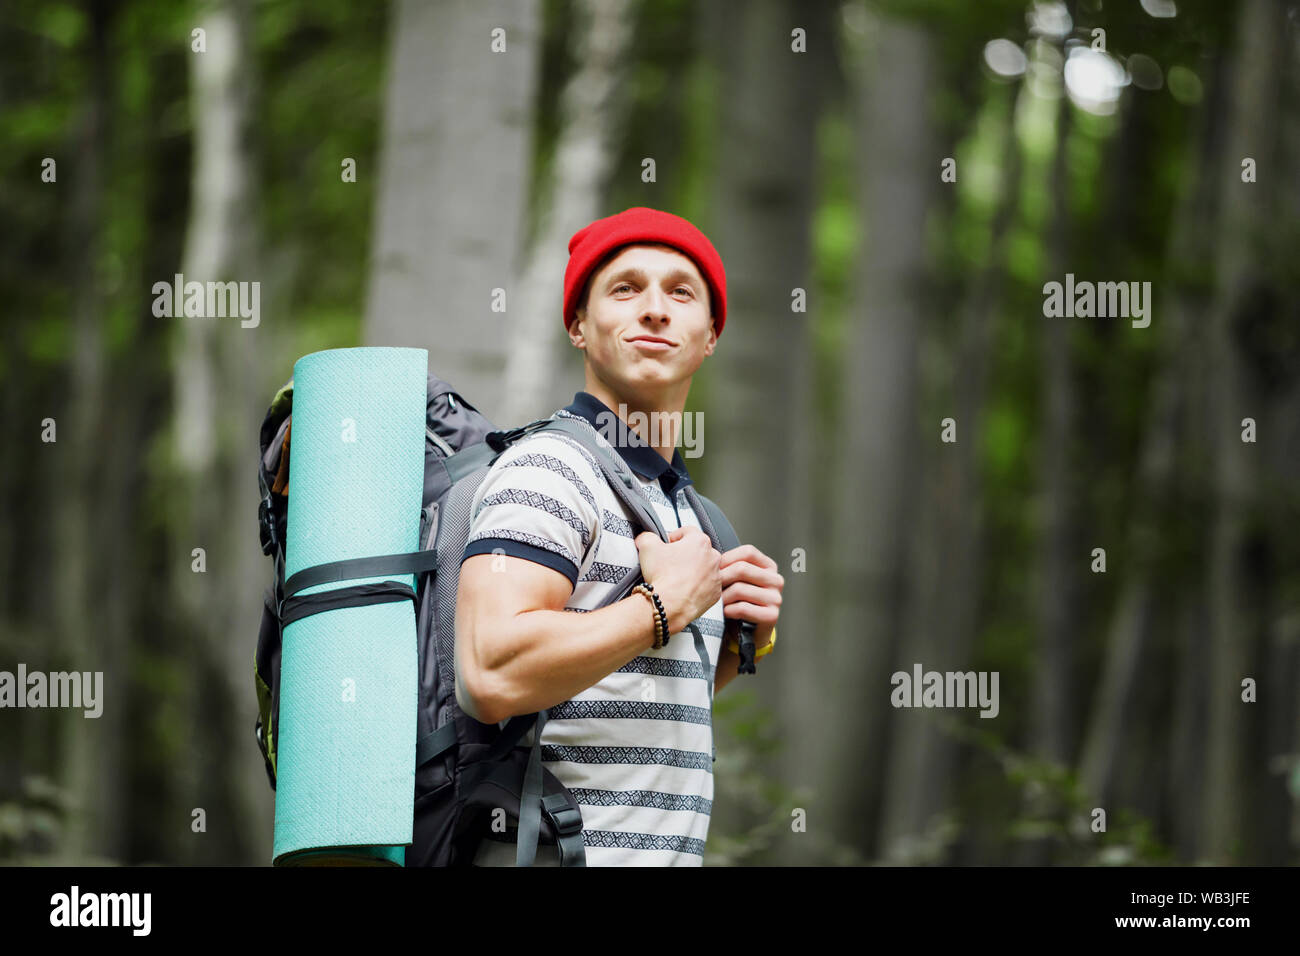 Young man wearing red hat with hiking equipment walking in mountain forest Stock Photo